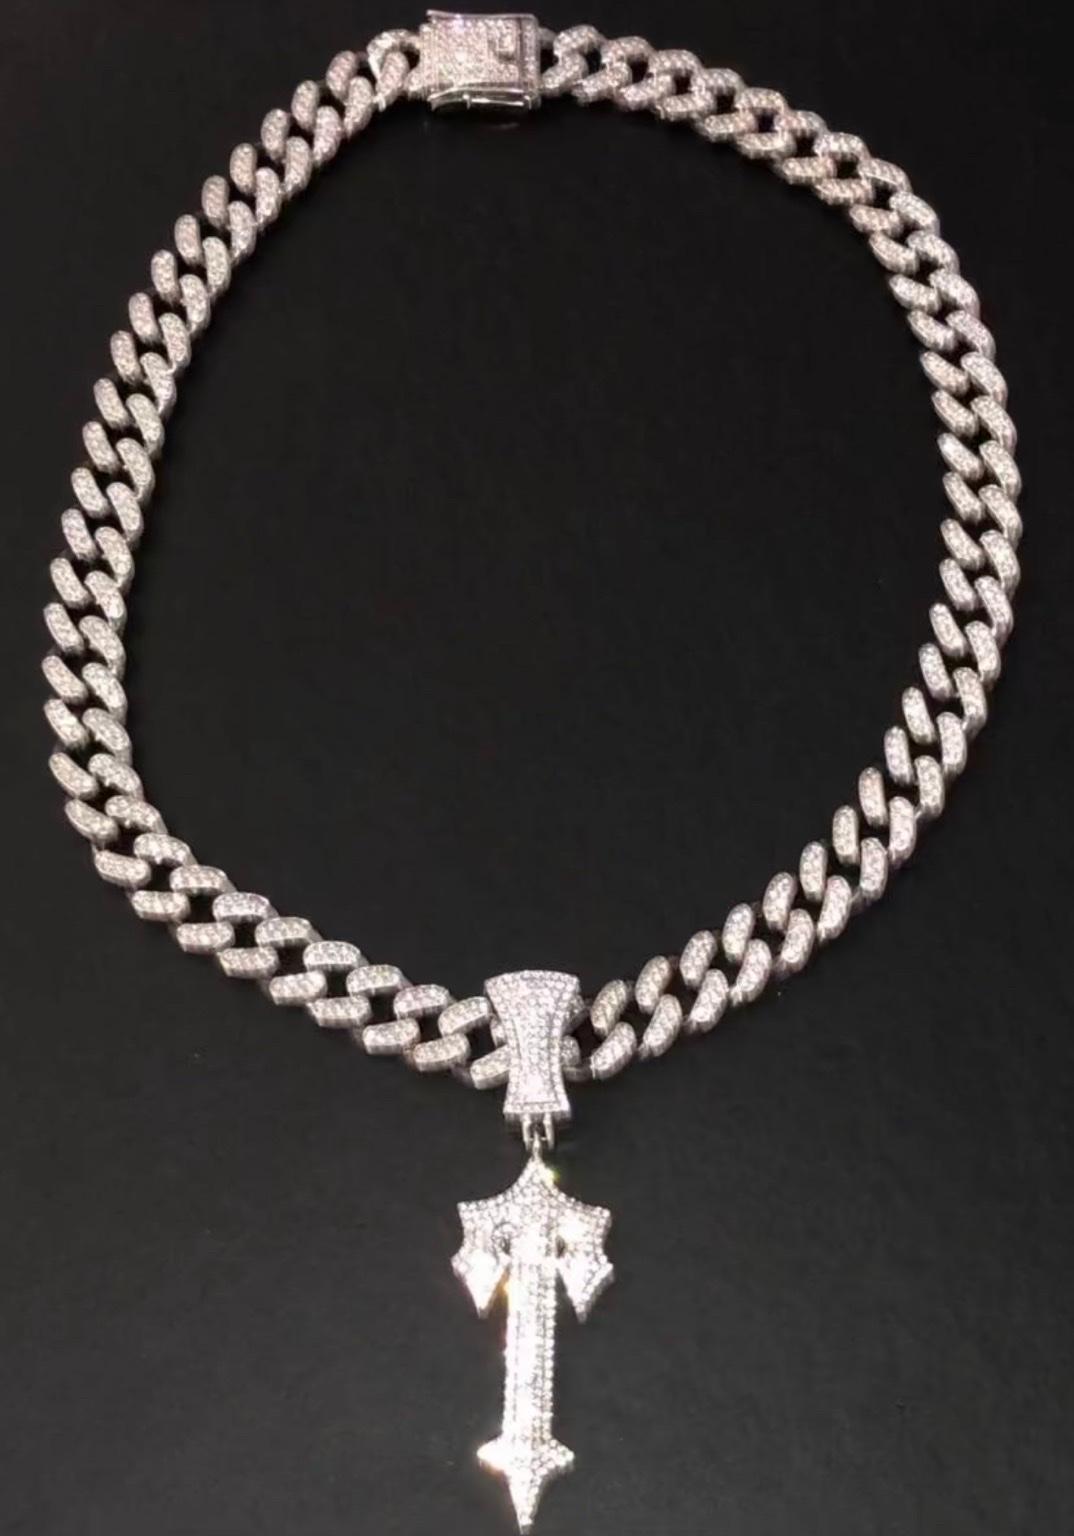 Trapstar chain in B66 Sandwell for £40.00 for sale | Shpock